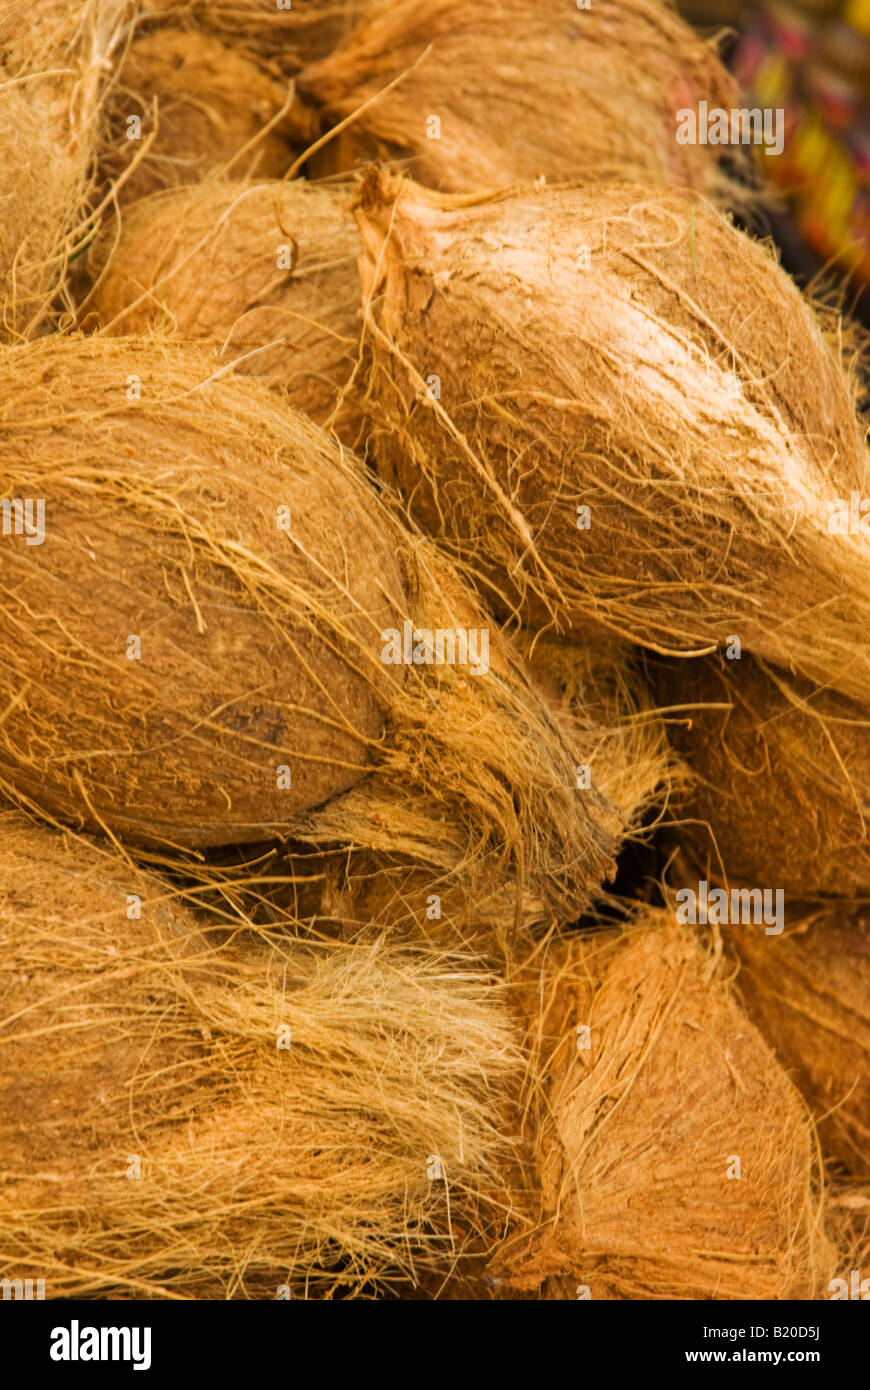 Coconuts on a market stall in Singapore Stock Photo